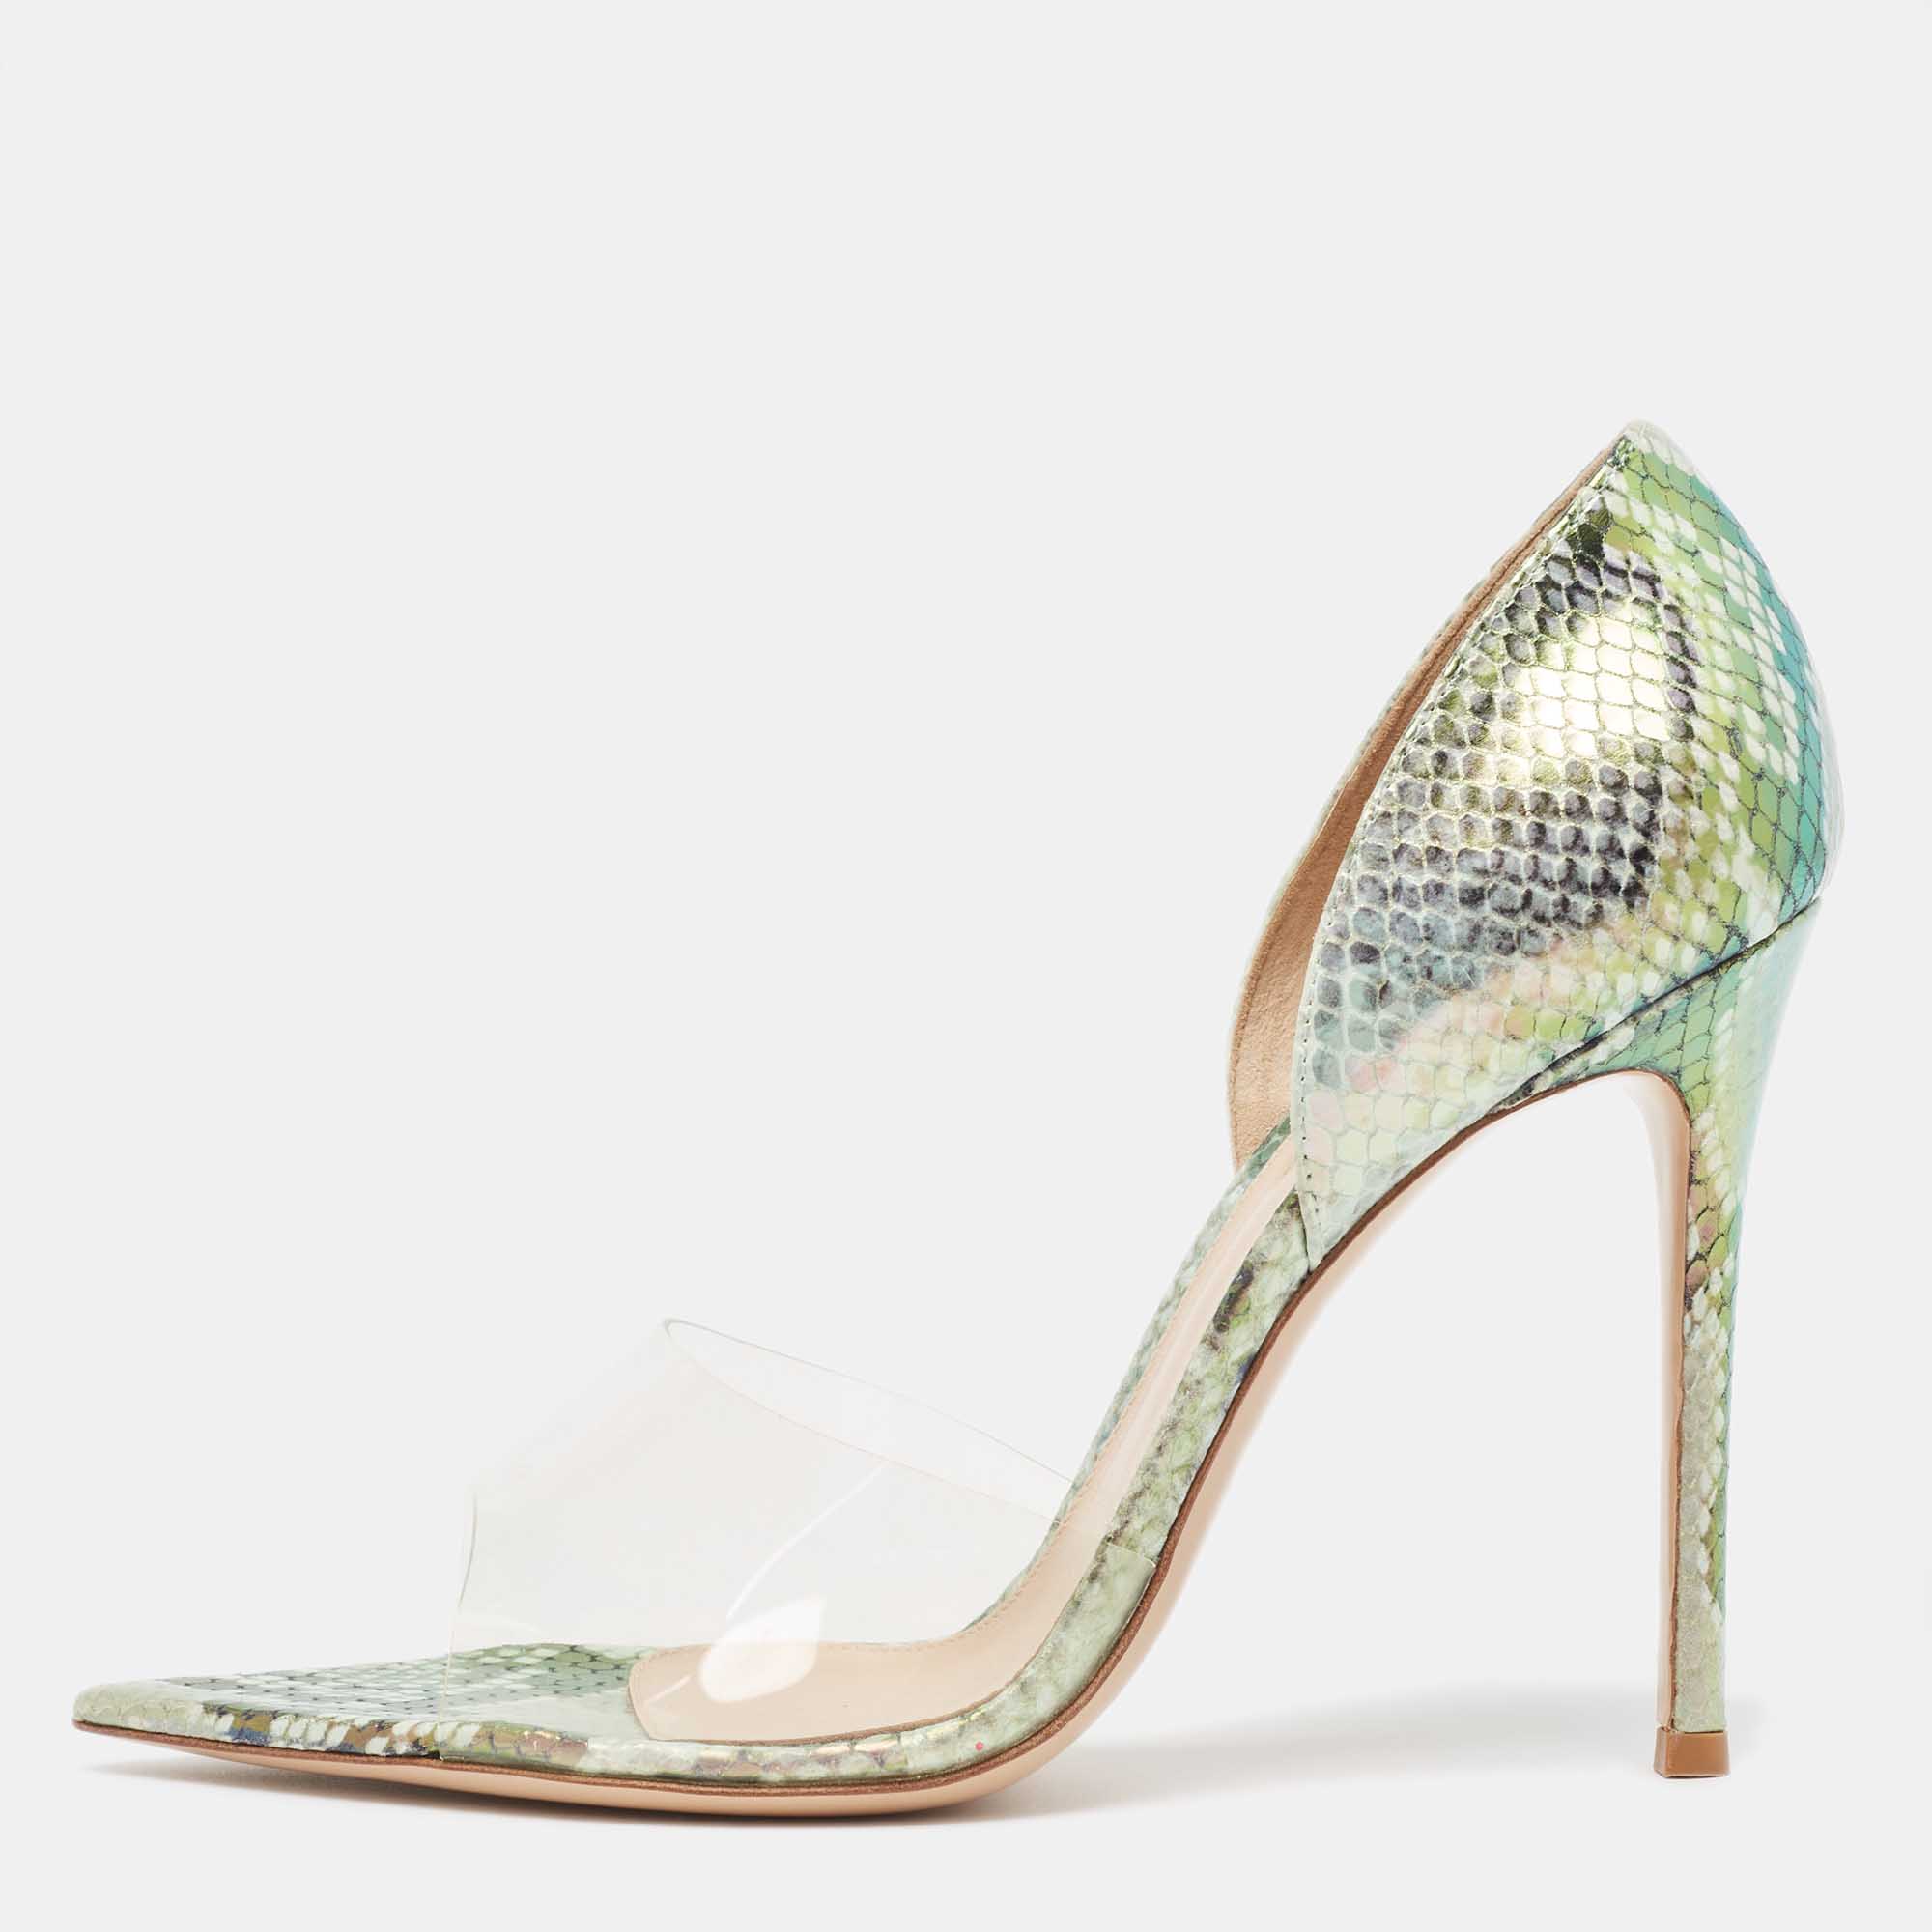 Gianvito rossi metallic embossed snakeskin and pvc bree pumps size 40.5